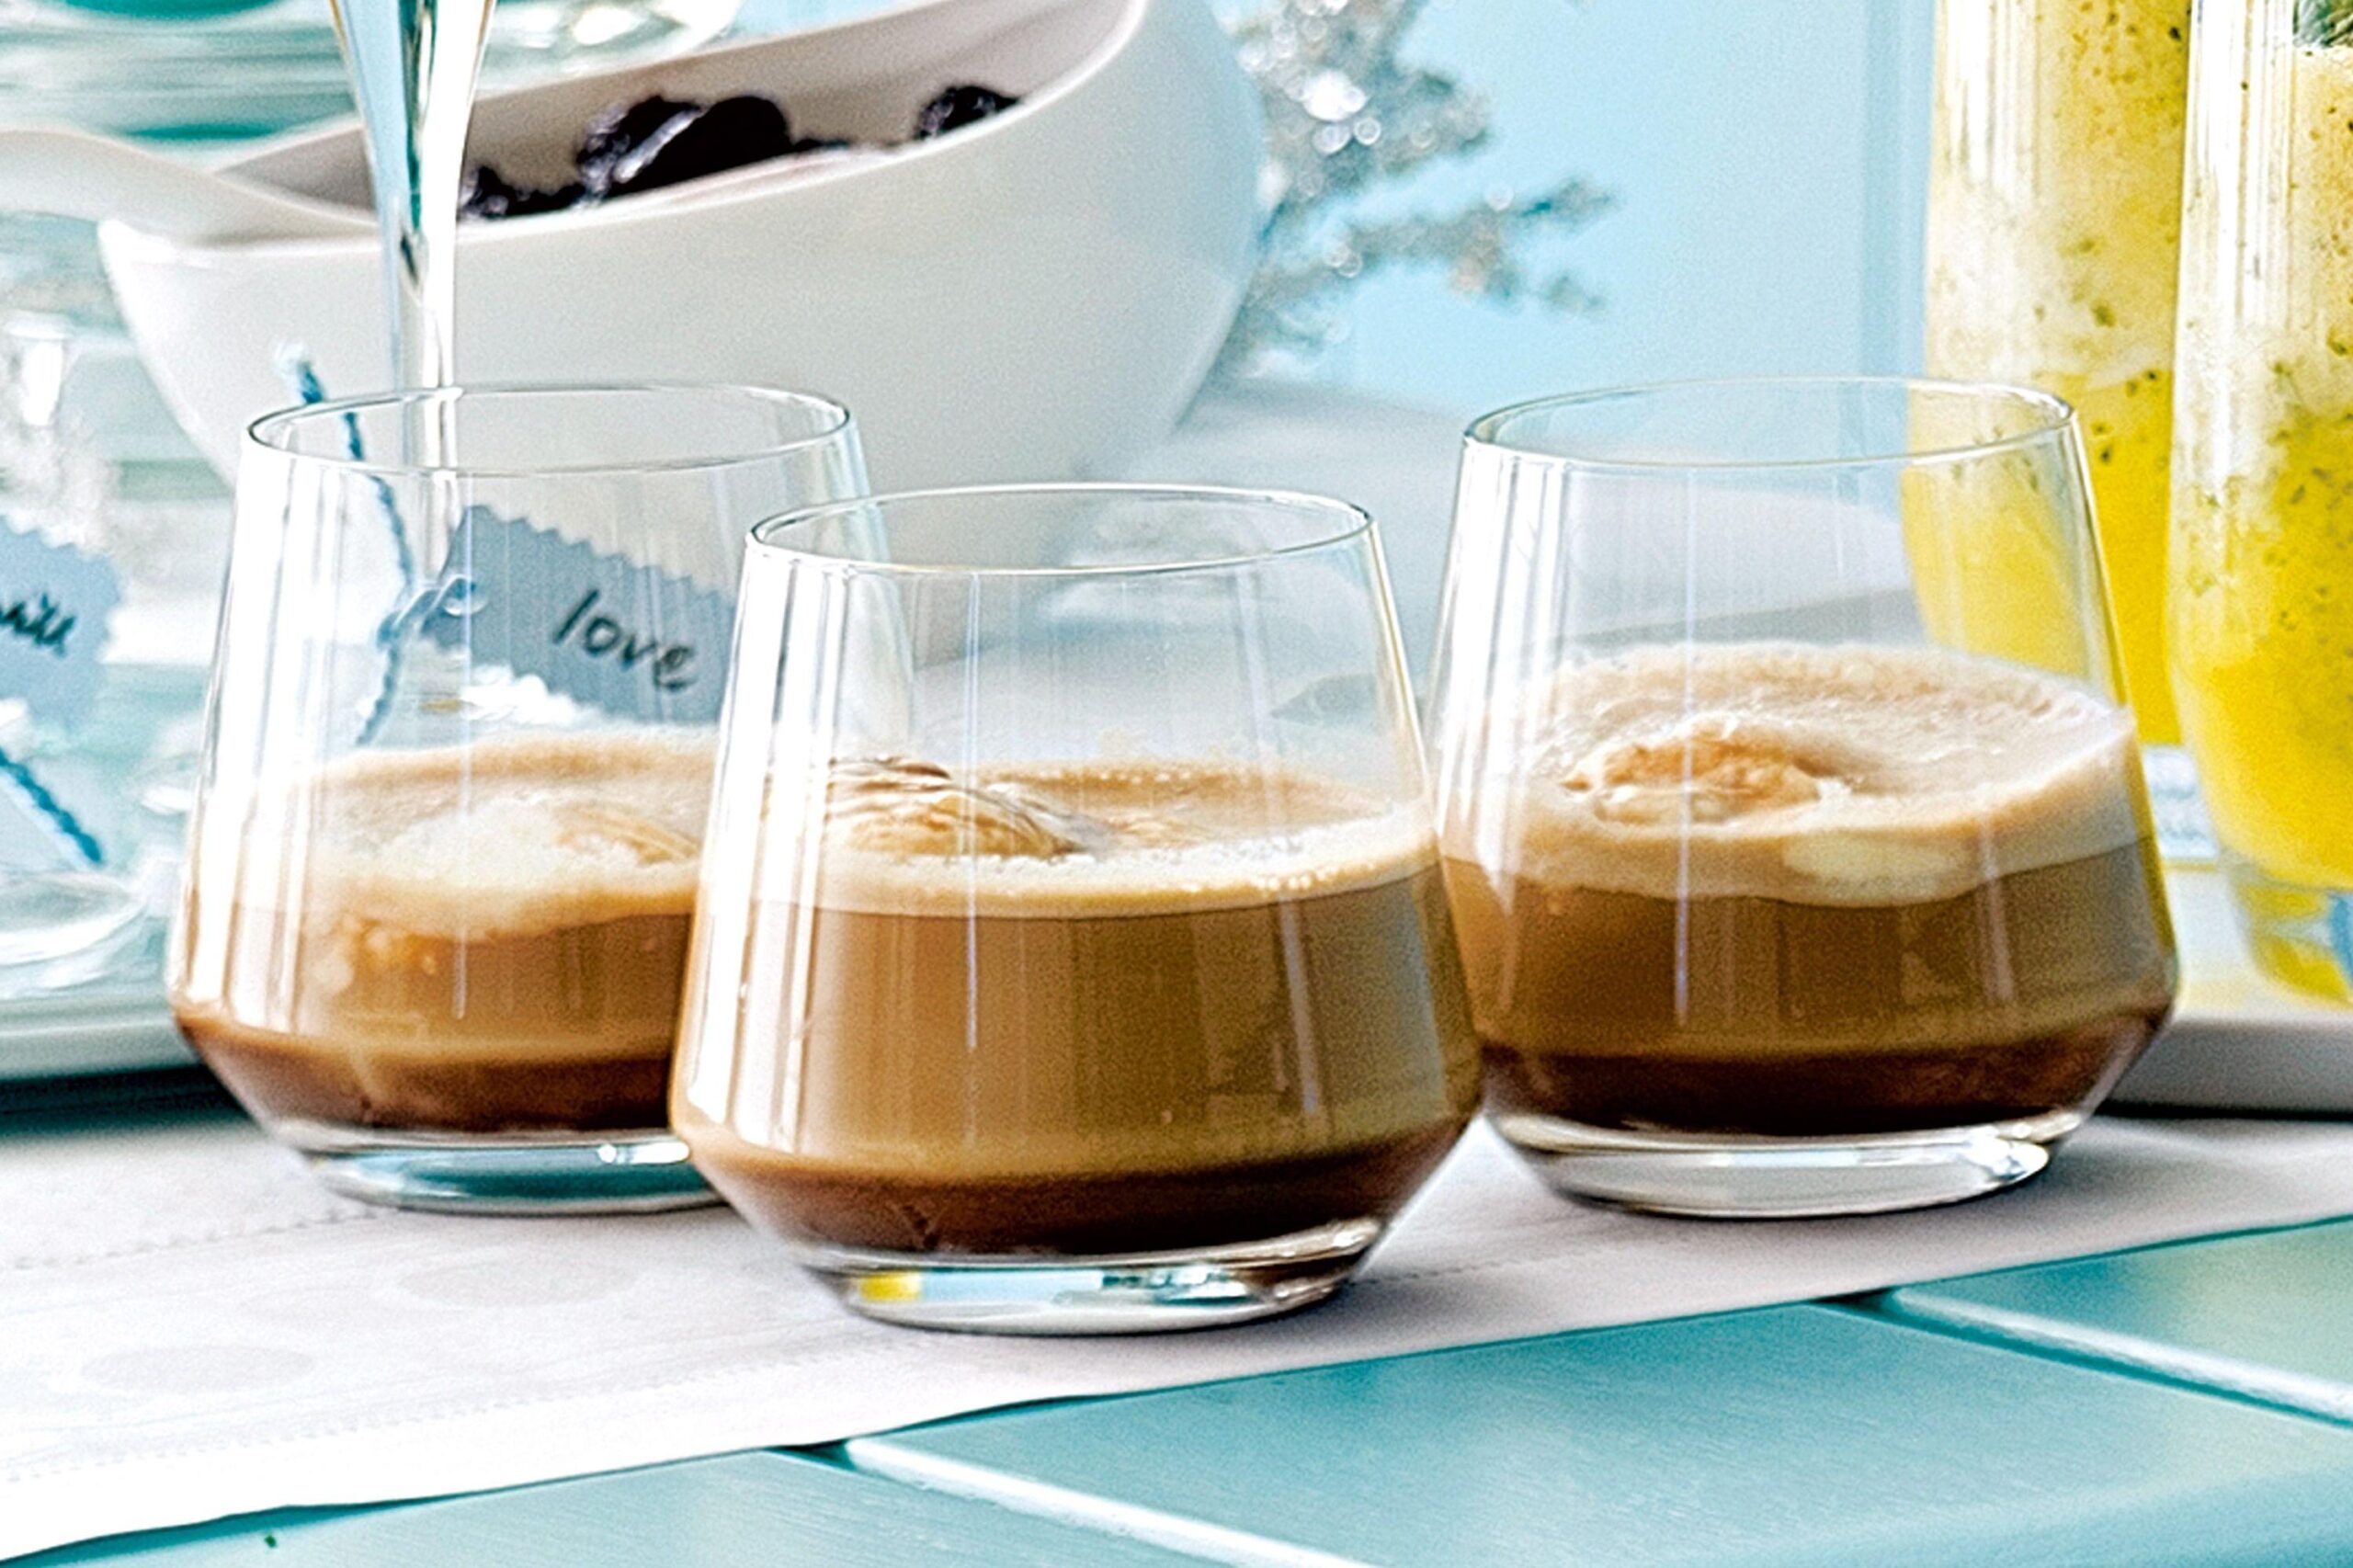  Beat the heat while satisfying your coffee cravings with this iced espresso.